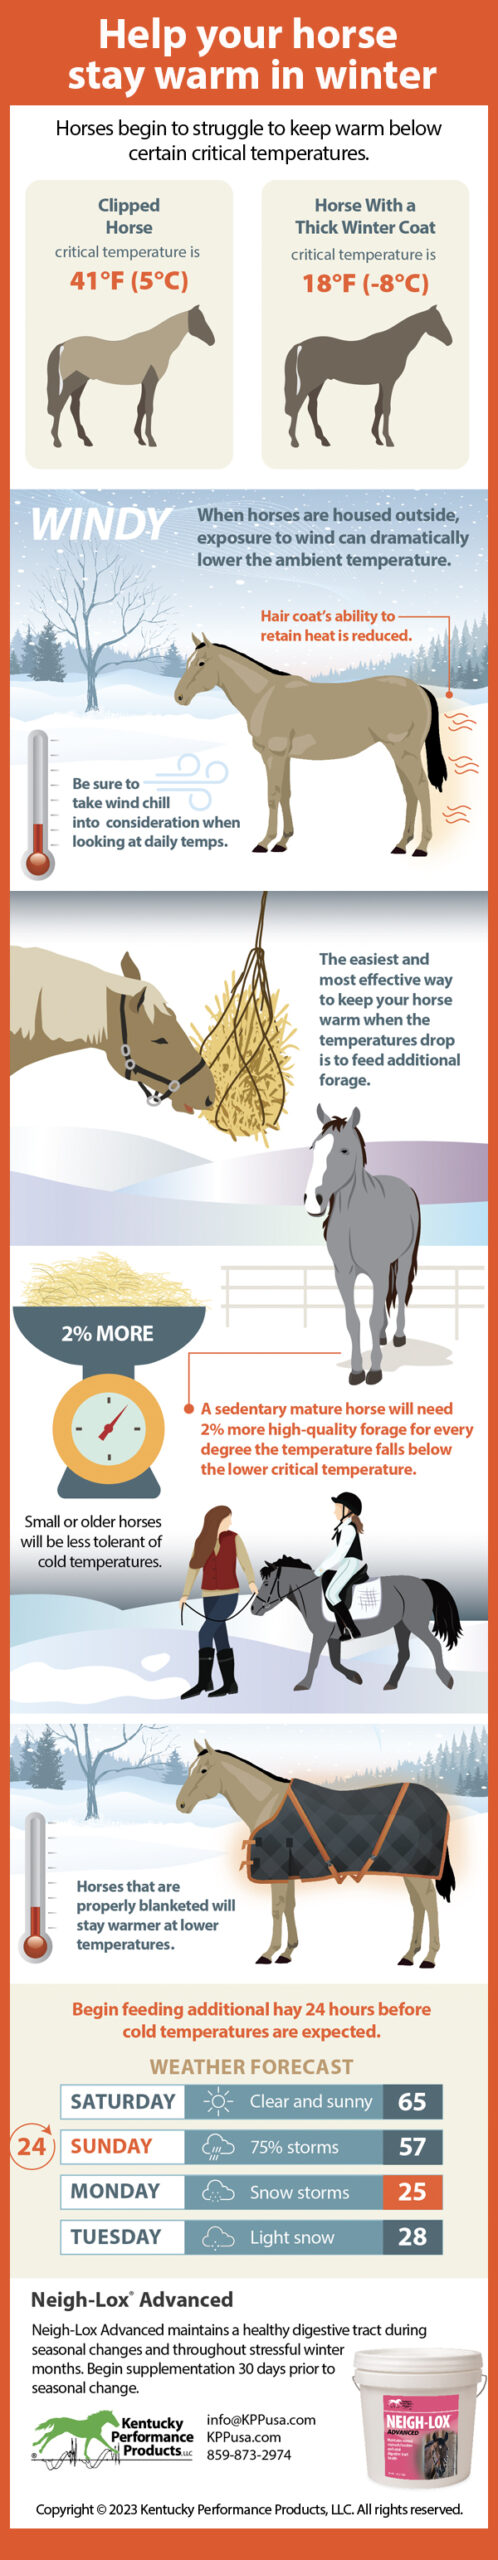 How to help your horse stay warm in winter - KPP